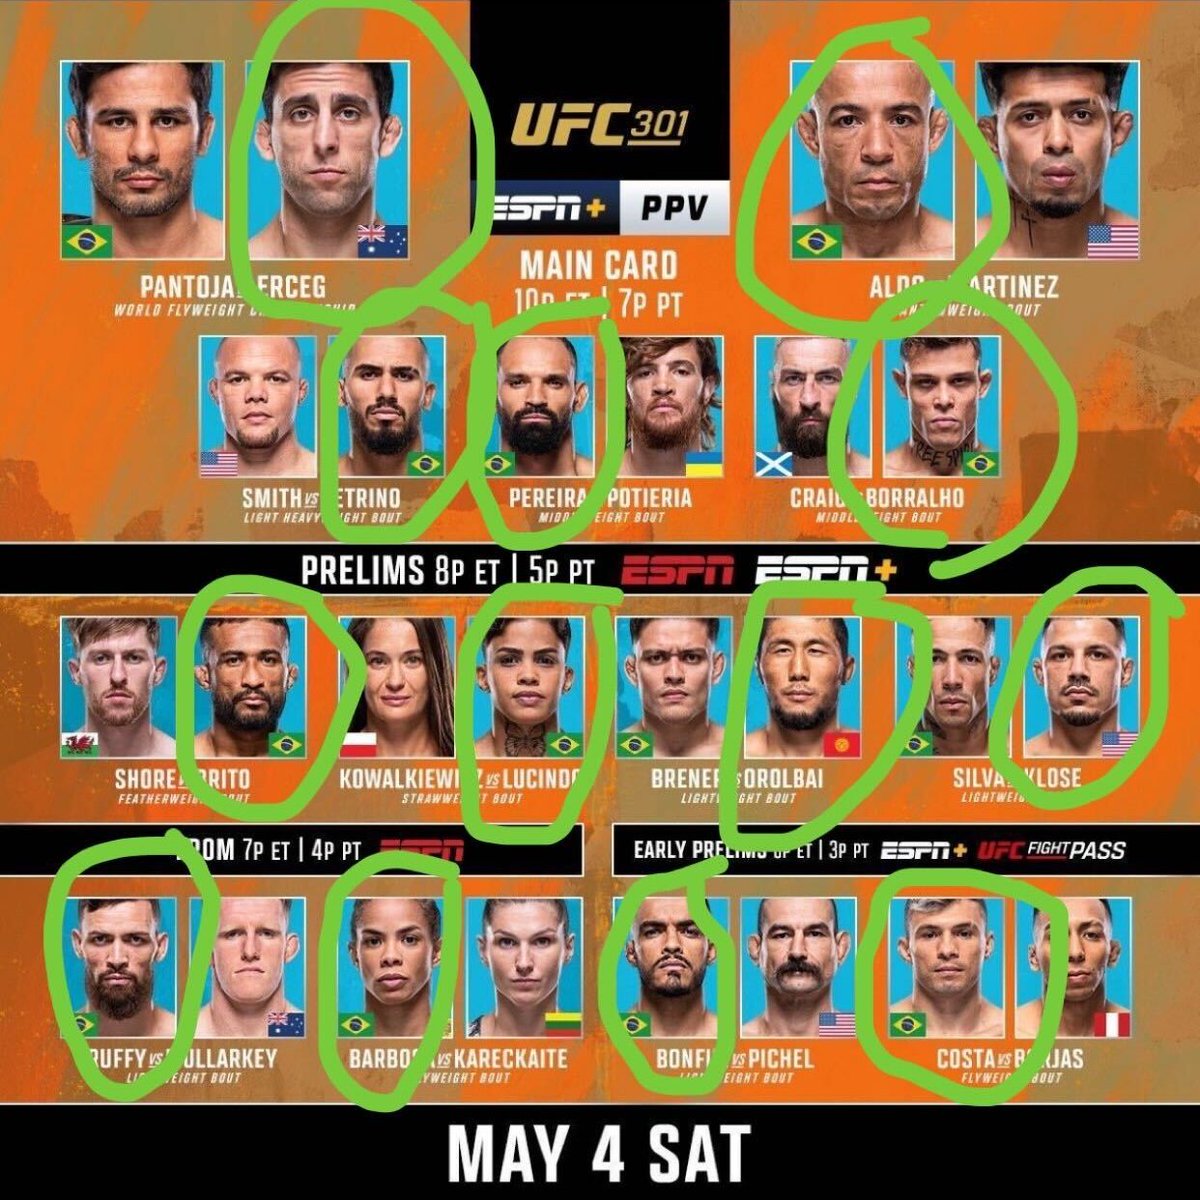 It's #UFC301 fight day. @patdannamma (light green) leads the way with 106 wins and likes Steve Erceg to upset Alexandre Pantoja tonight and win the UFC flyweight title. #UFC #MMATwitter @zainbando99 and @thomasjalbano are riding with the champ! @ETBnetwork | @WatchPlayback